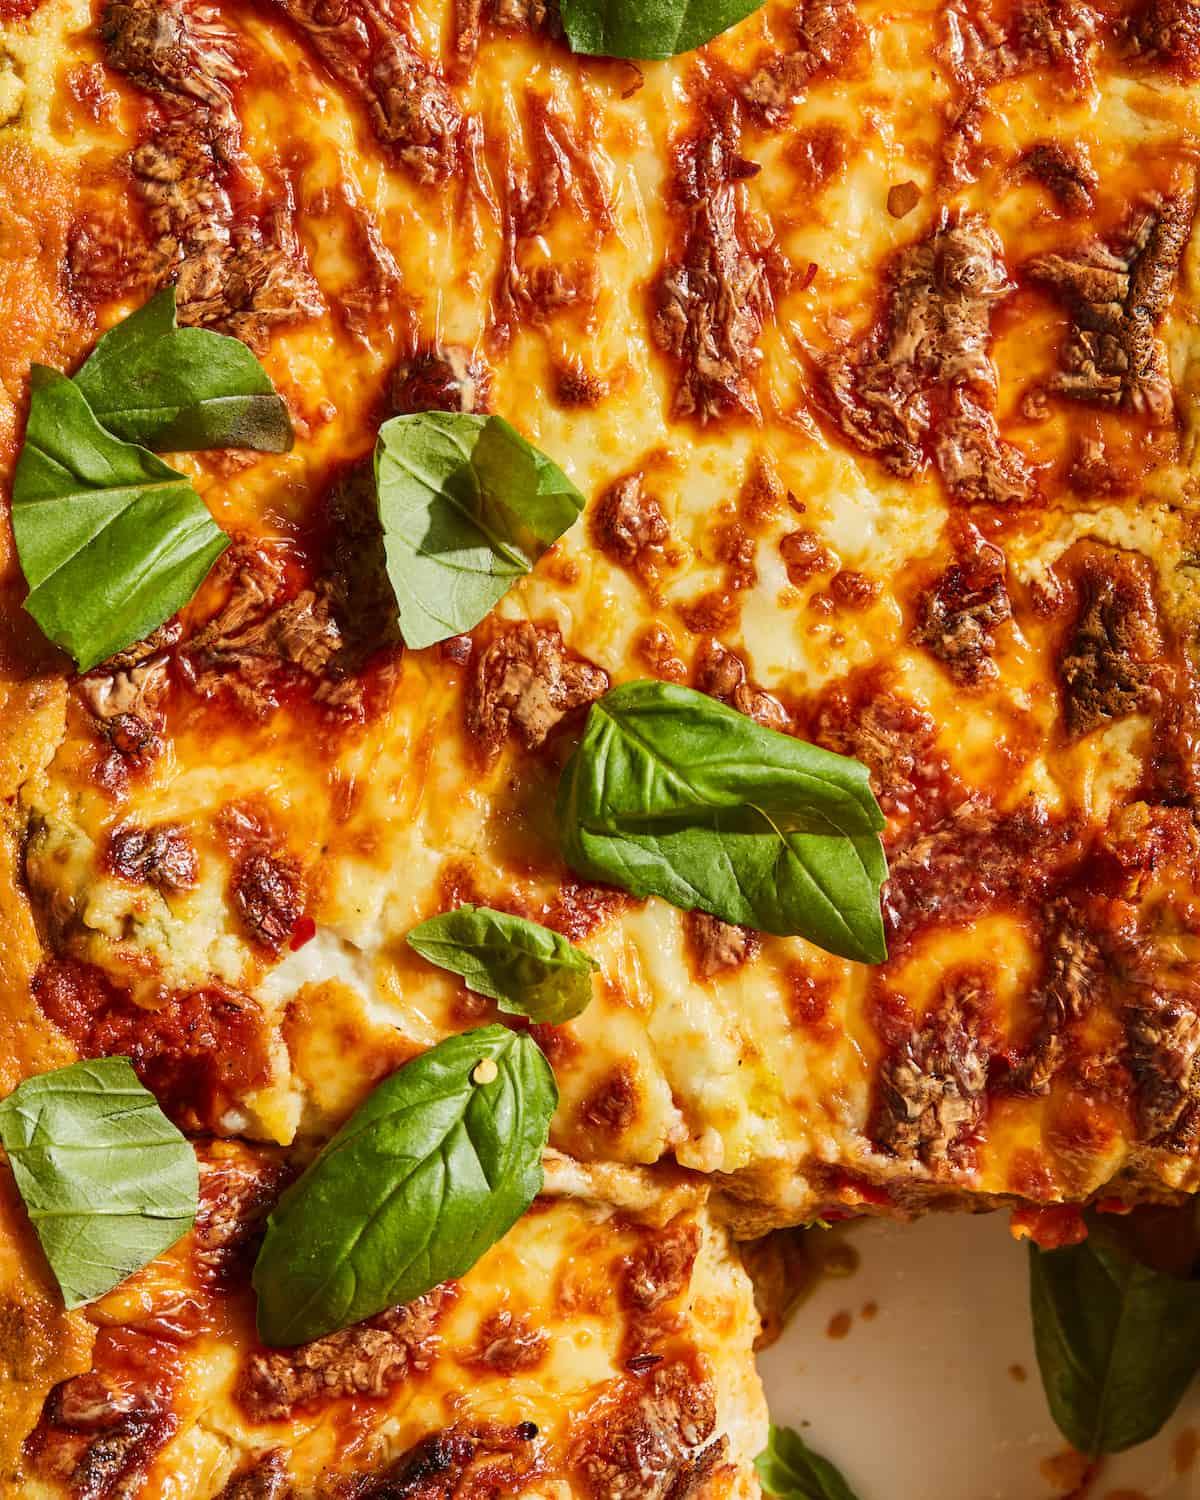 A close-up shot of three meat lasagna, garnished with basil leaves.